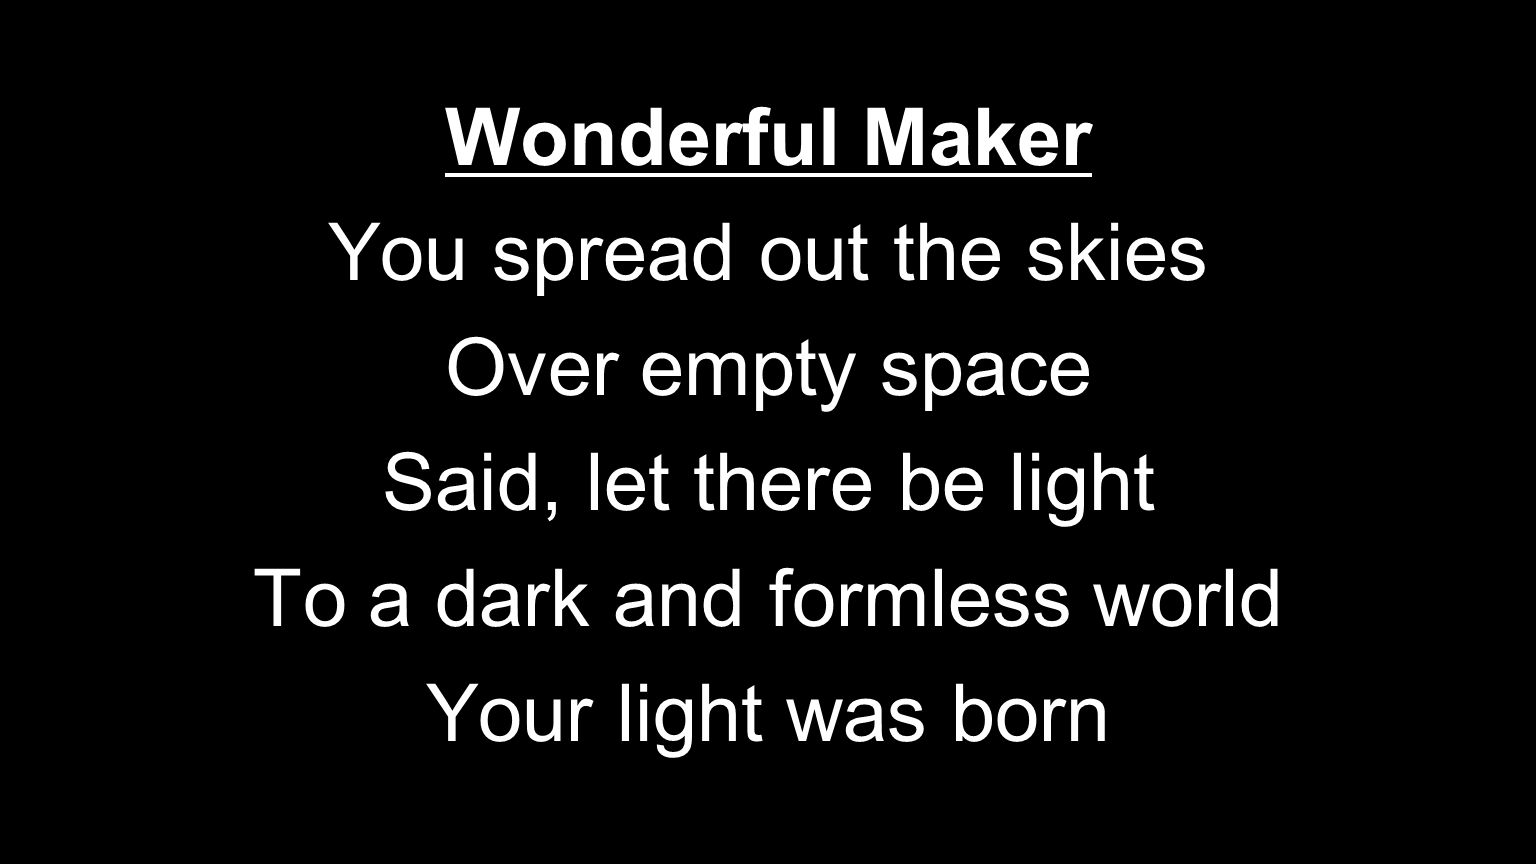 Wonderful Maker You spread out the skies Over empty space Said, let there be light To a dark and formless world Your light was born